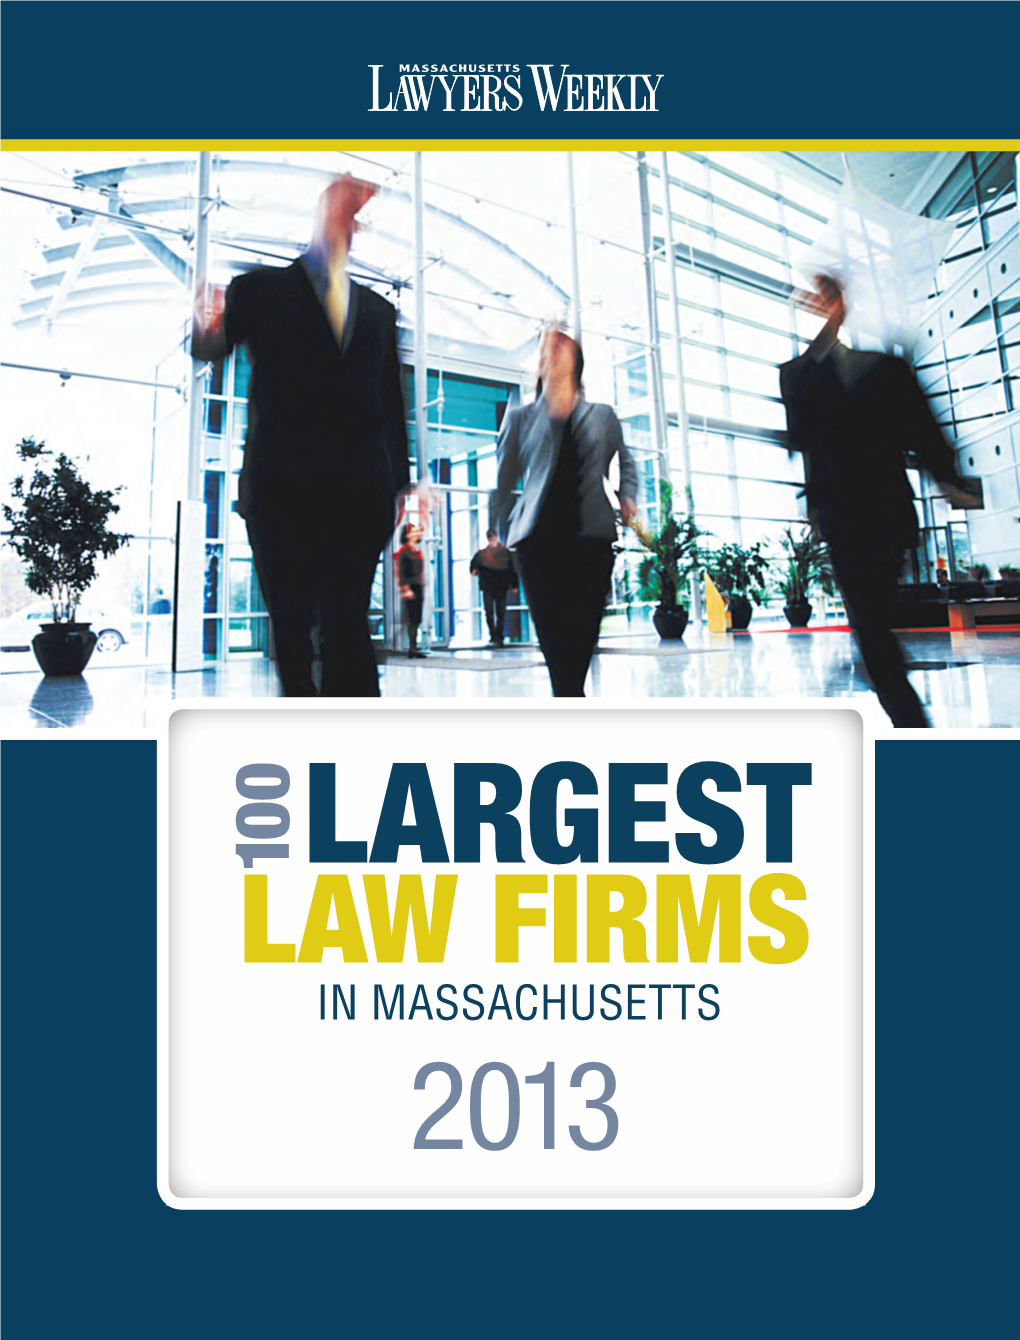 100 LARGEST LAW FIRMS 2013 Boston University School of Law Where Great Students Learn How to Be Great Lawyers